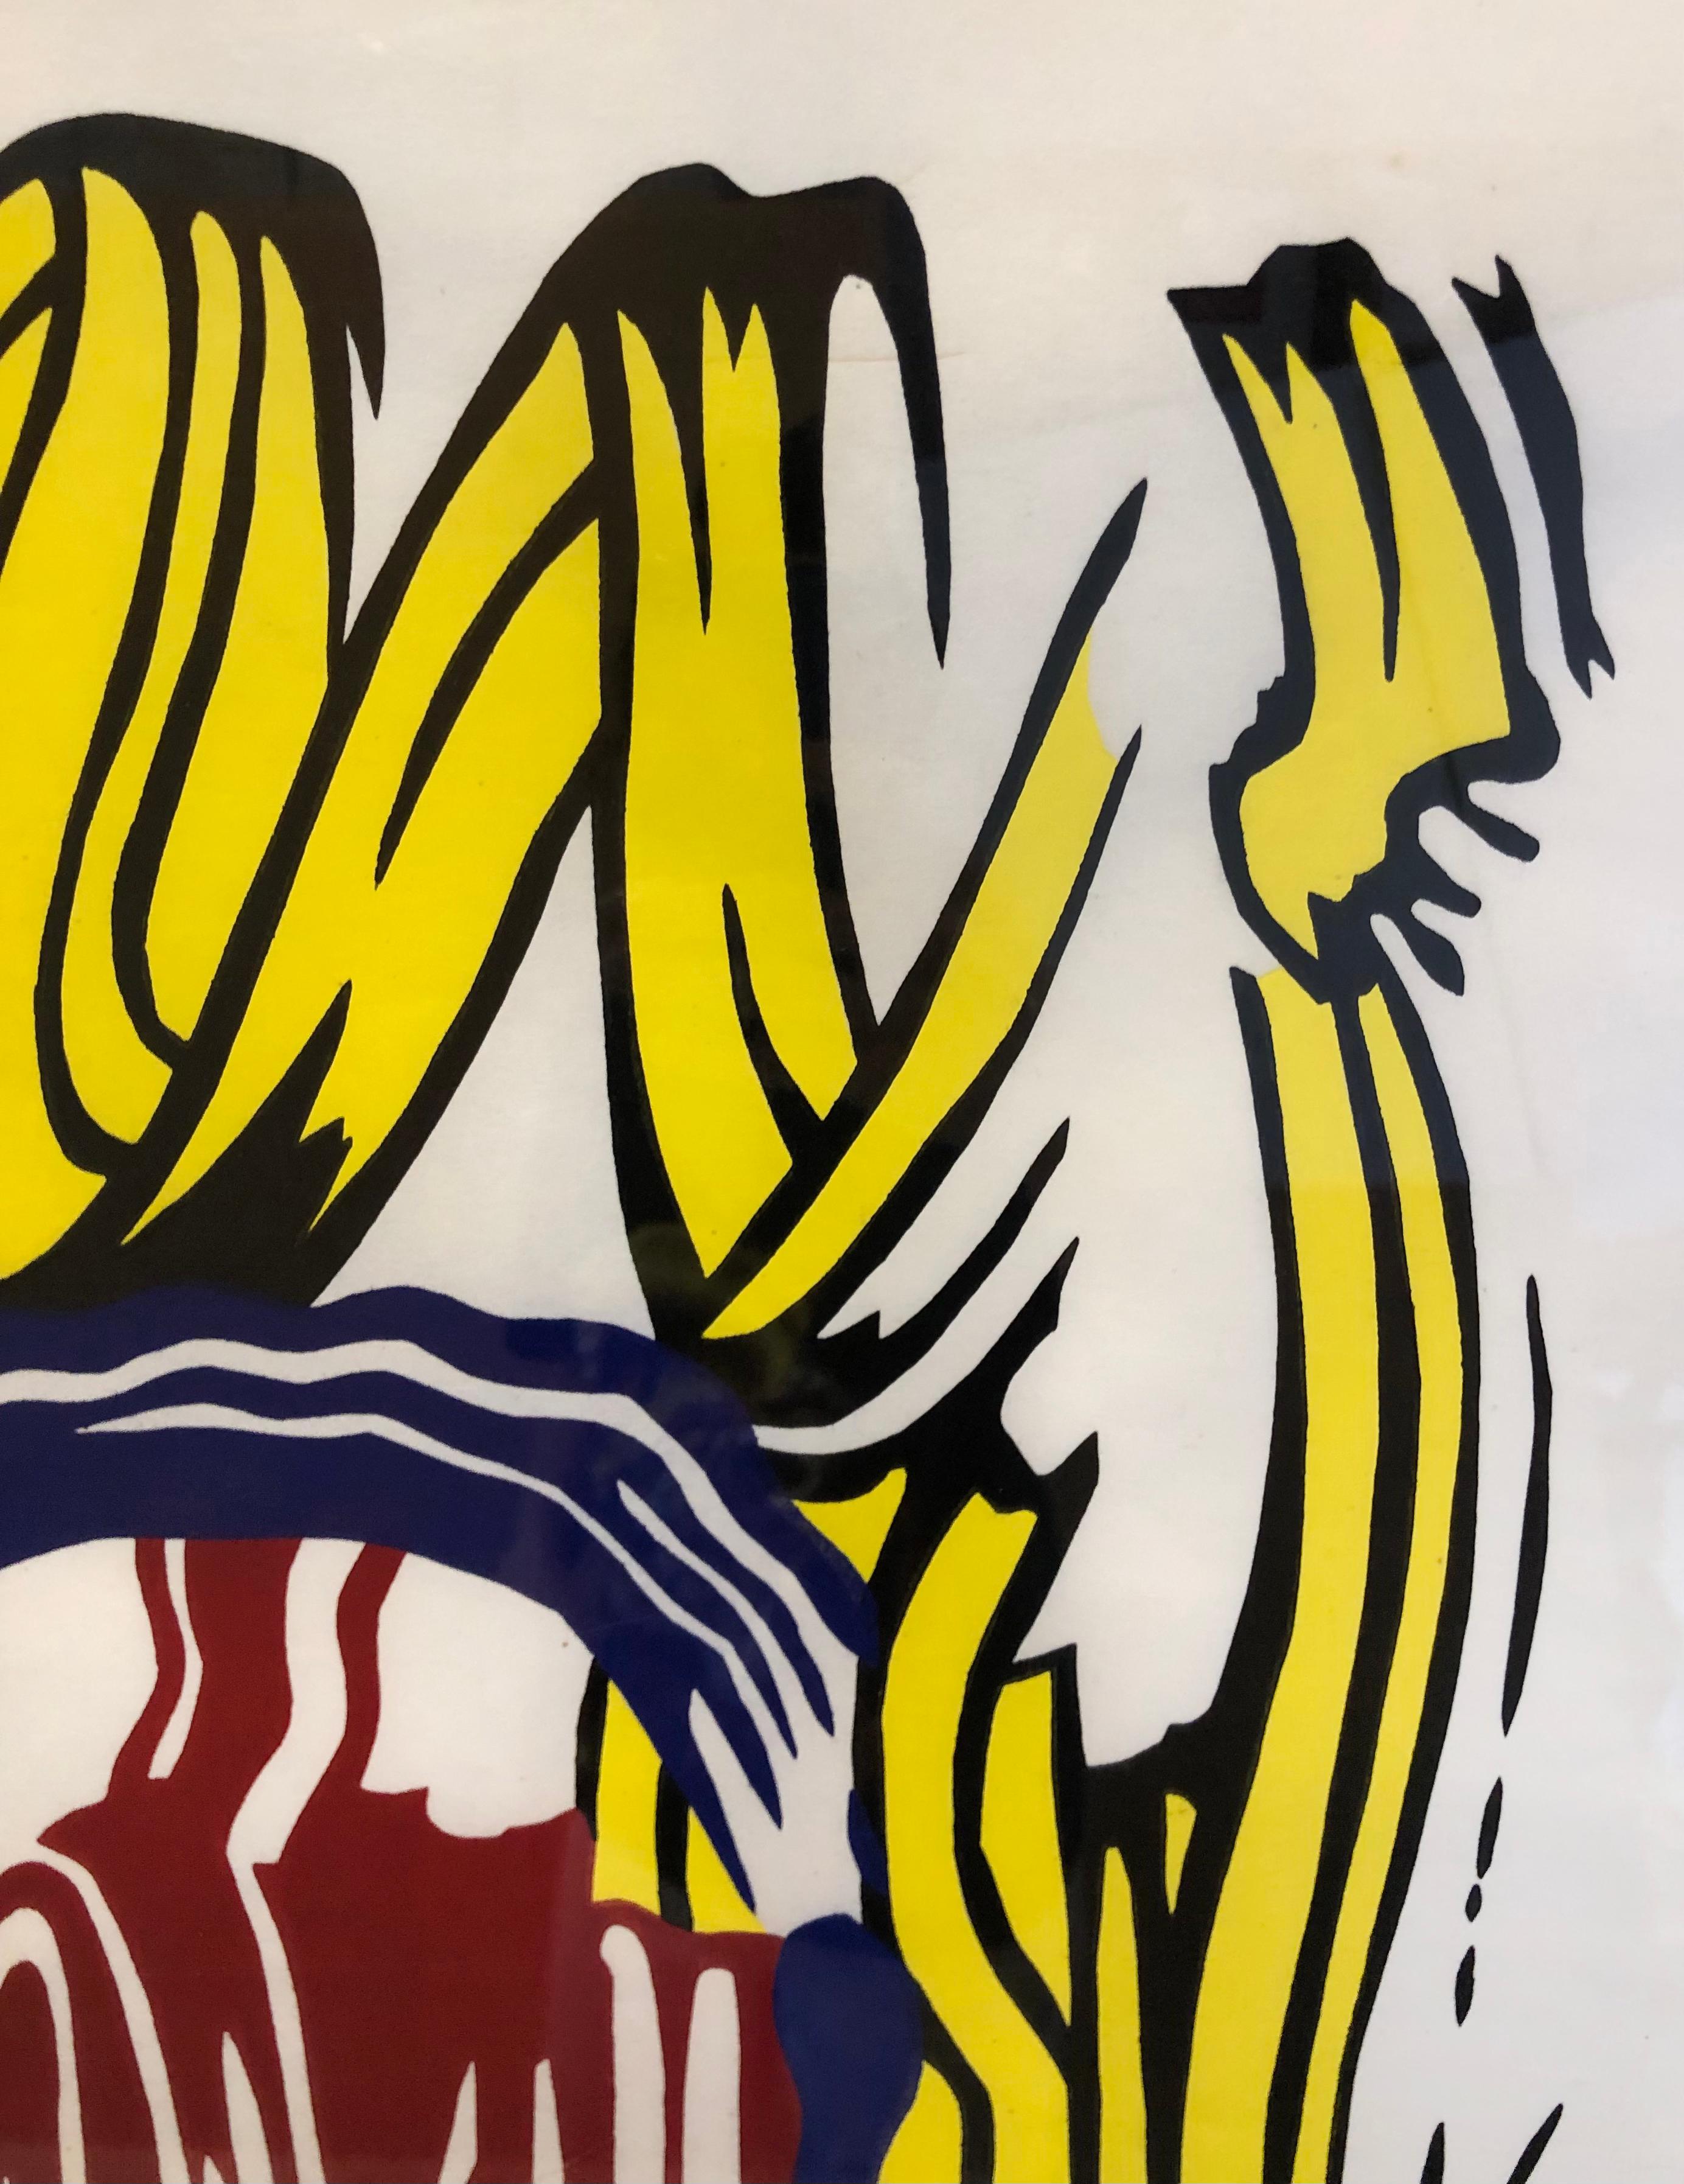 This Roy Lichtenstein woodcut from the Seven Apple Woodcuts portfolio is an electric take on the humble still life. Striated black and blue brushstrokes sketch the outline of an apple, filled with graphic ribbons of color that fall in folds towards